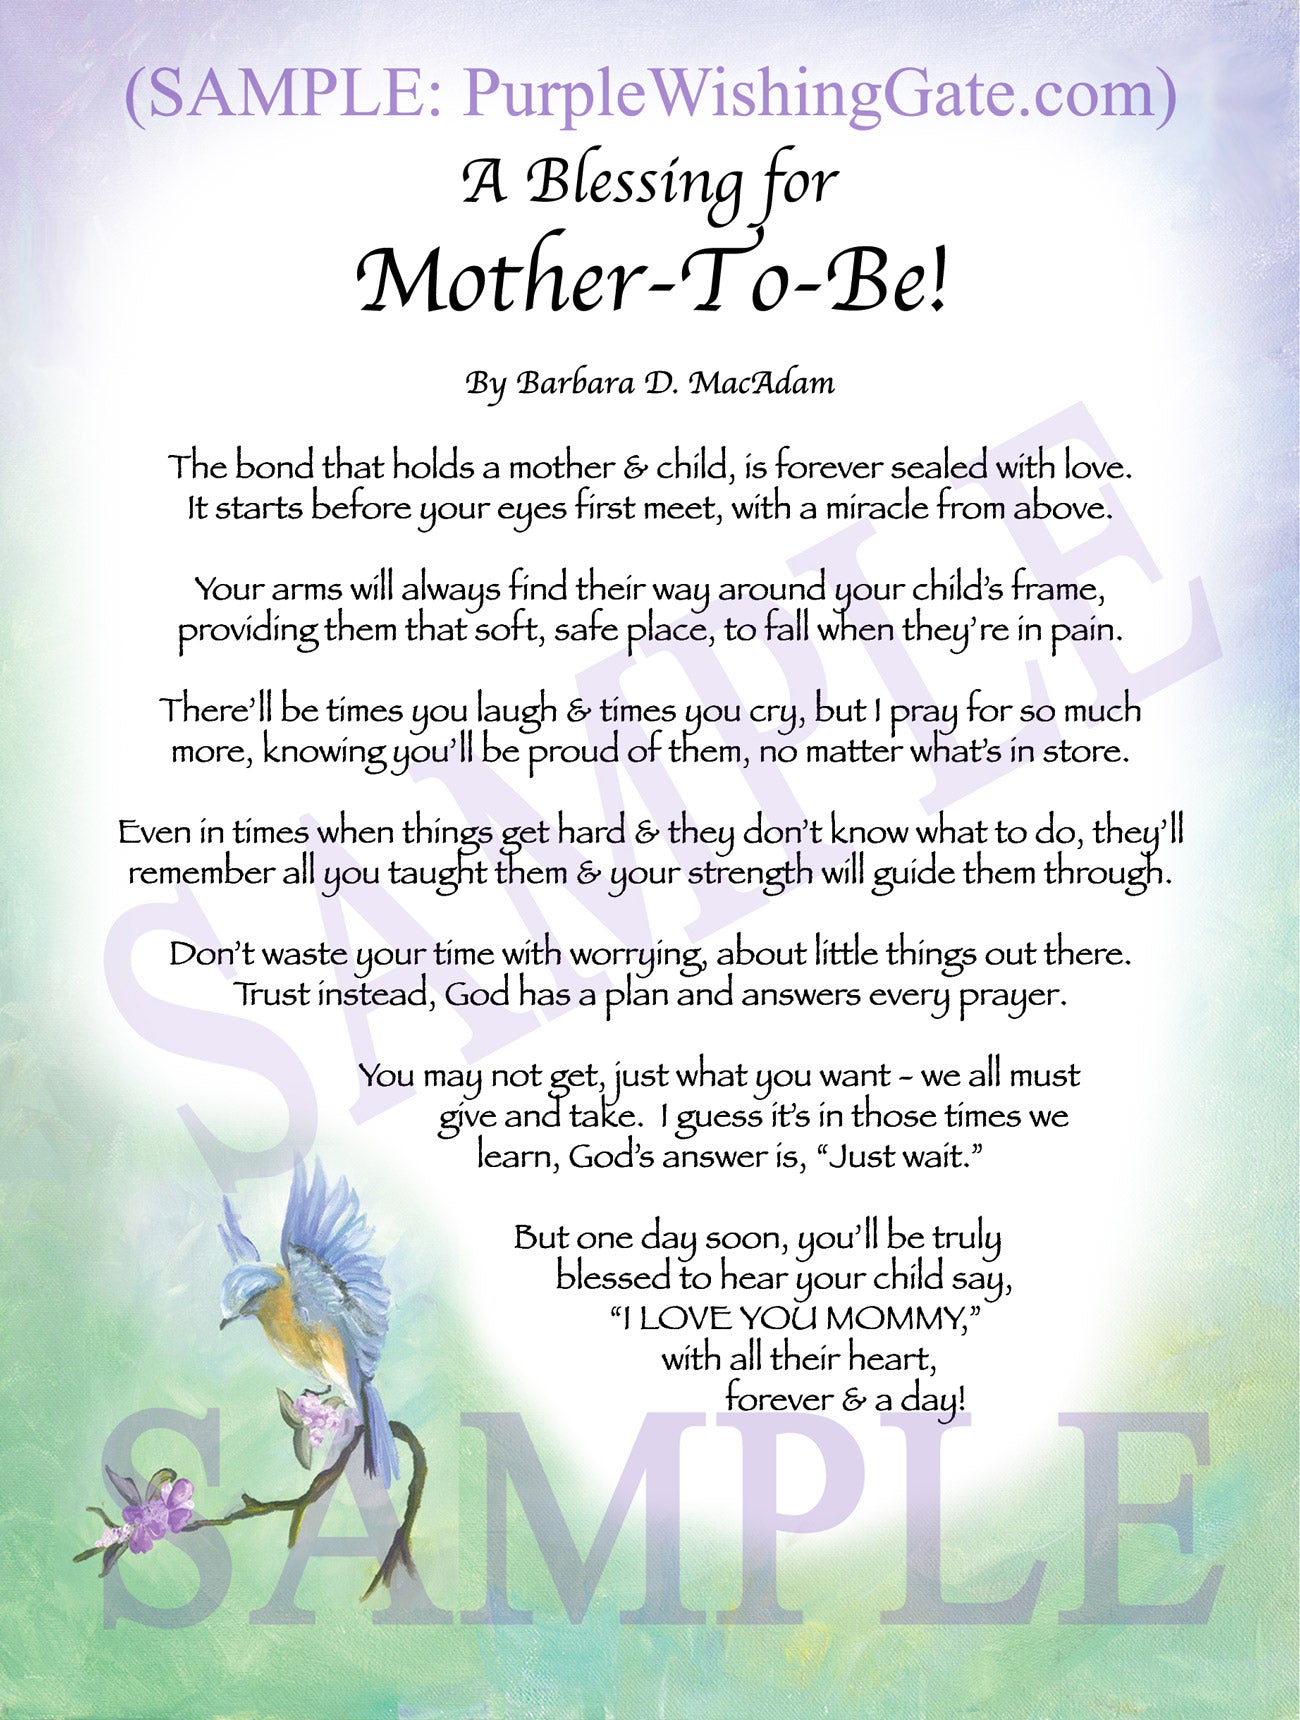 
              
        		A Blessing for Mother-To-Be! - Gifts for Mom-Mother - PurpleWishingGate.com
        		
        	